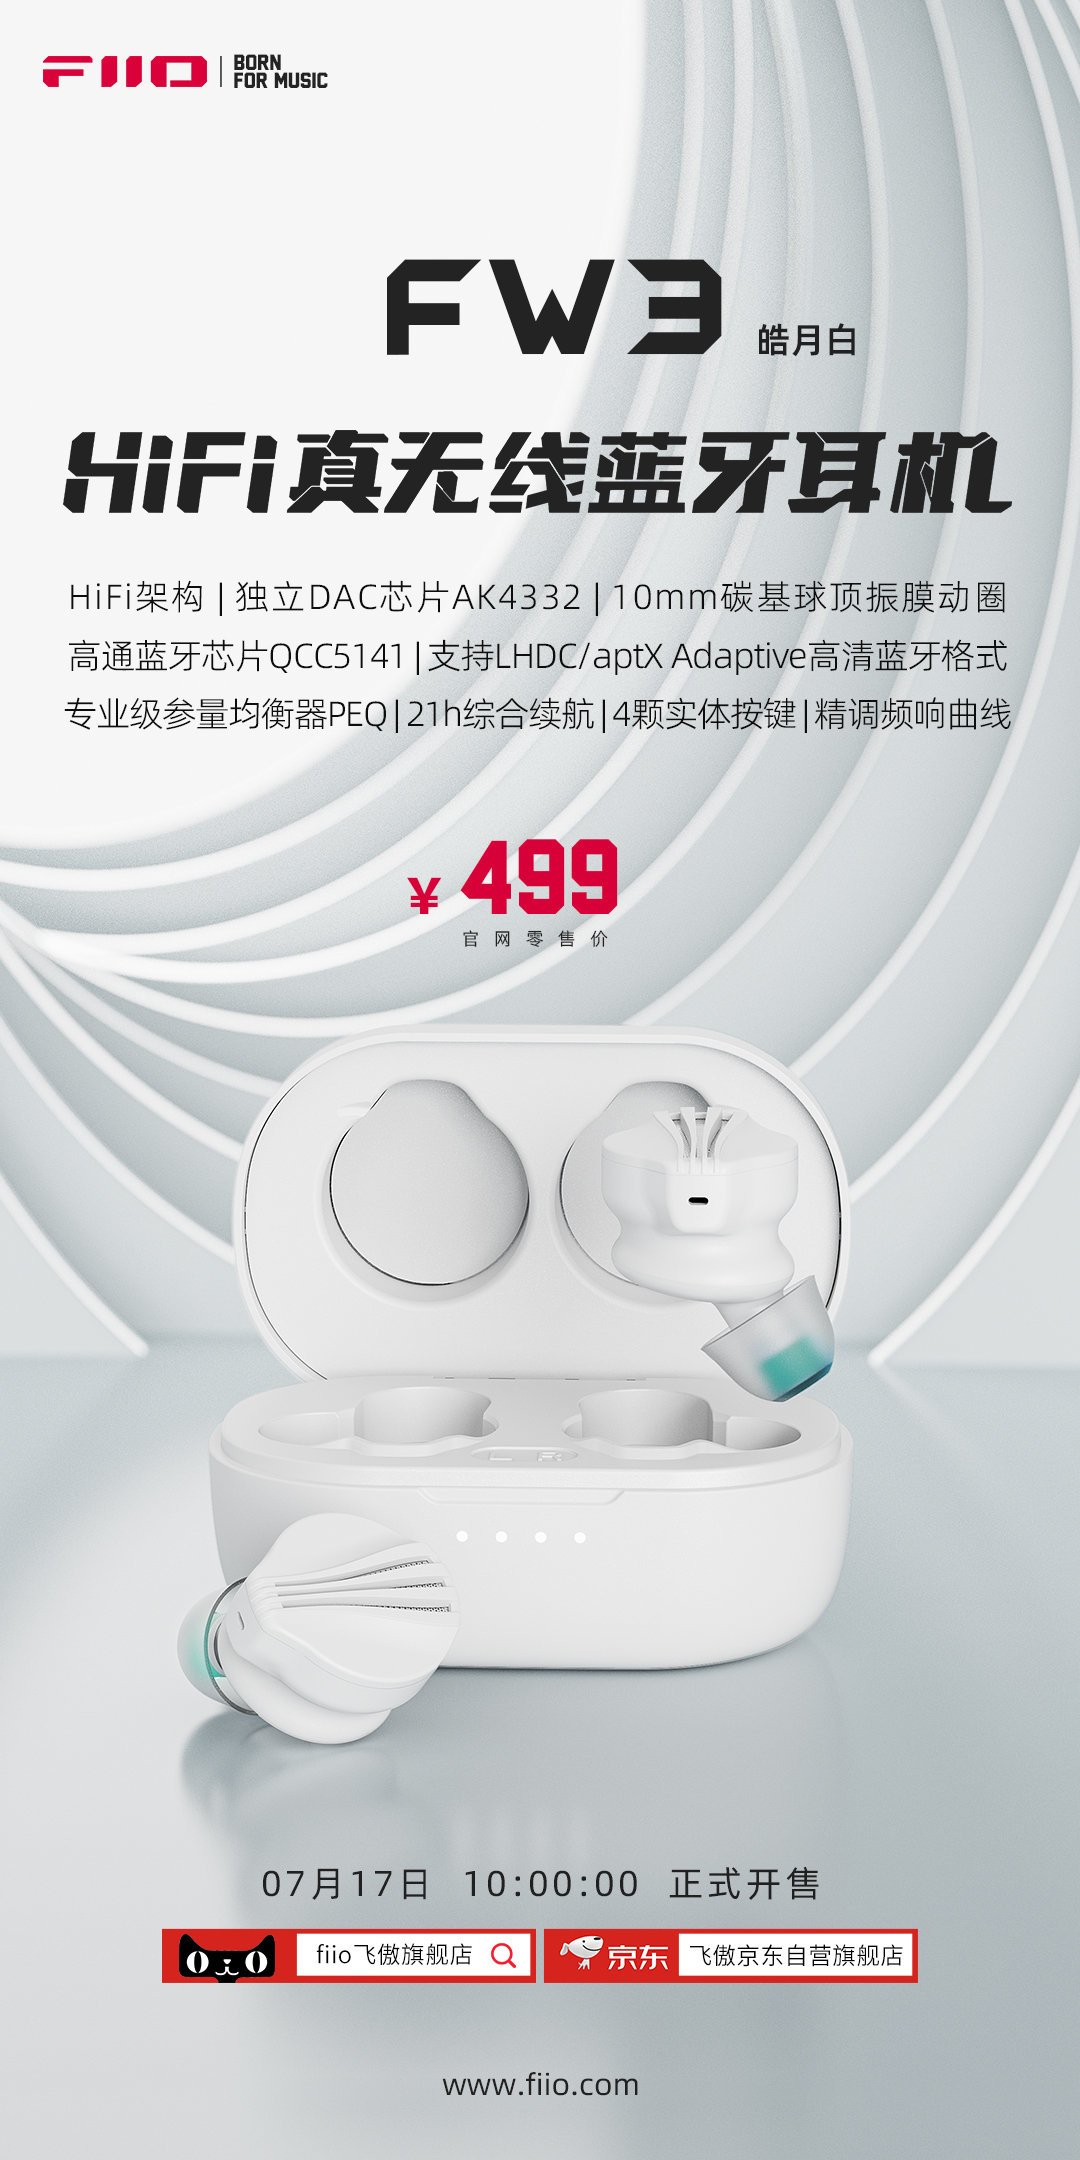 FiiO FW3 HiFi TWS Earbuds now available in White color for